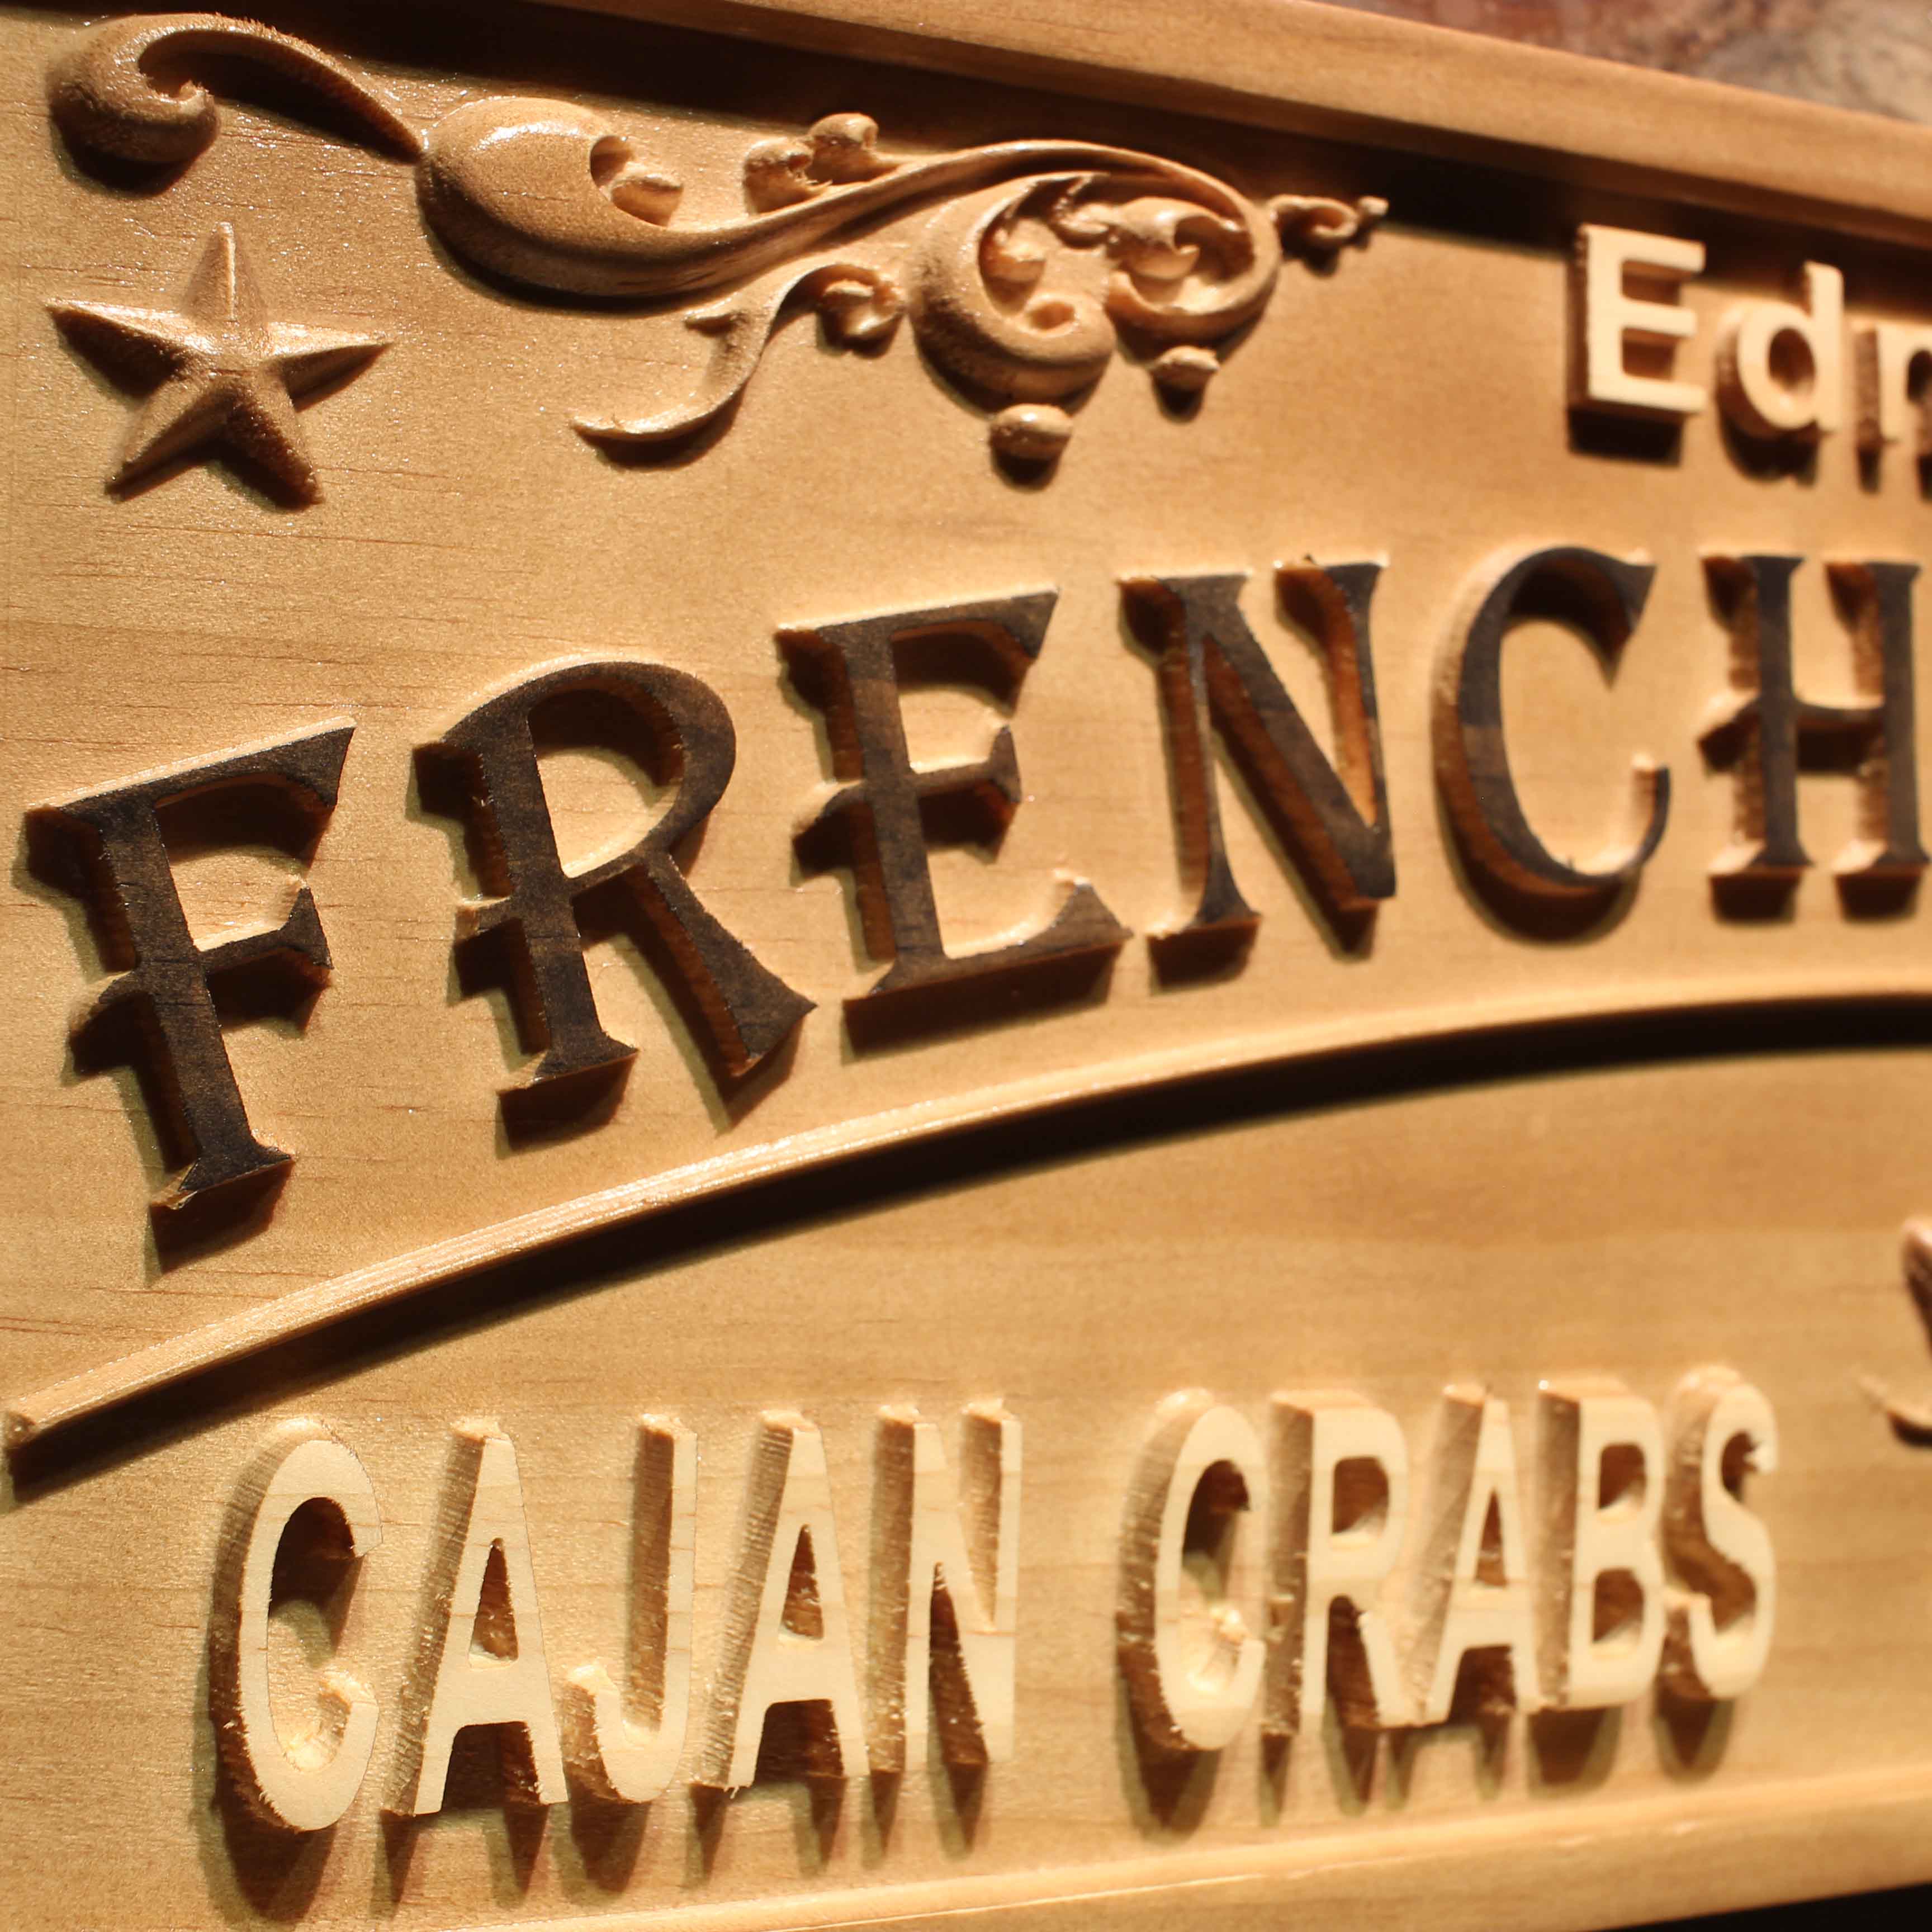 Personalized Seafood Crabs Market Kitchen Decoration Housewarming Gifts First Name Wood Engraved Wooden Sign